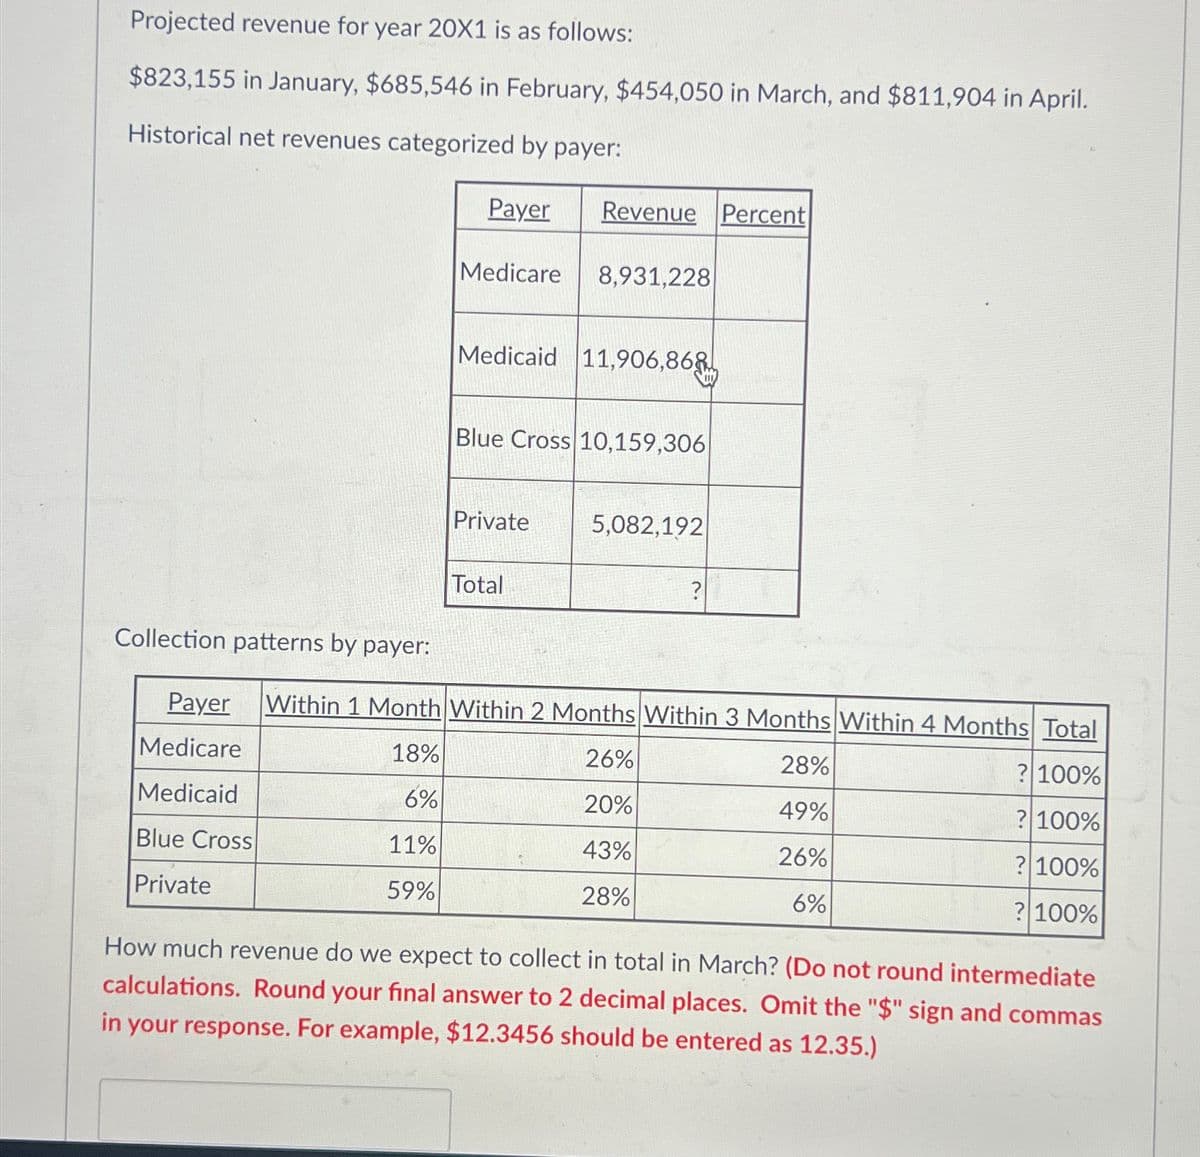 Projected revenue for year 20X1 is as follows:
$823,155 in January, $685,546 in February, $454,050 in March, and $811,904 in April.
Historical net revenues categorized by payer:
Payer
Revenue Percent
Medicare 8,931,228
Medicaid 11,906,868
Blue Cross 10,159,306
Private
5,082,192
Total
?
Collection patterns by payer:
Payer Within 1 Month Within 2 Months Within 3 Months Within 4 Months Total
Medicare
18%
26%
28%
? 100%
Medicaid
6%
20%
49%
? 100%
Blue Cross
11%
43%
26%
? 100%
Private
59%
28%
6%
? 100%
How much revenue do we expect to collect in total in March? (Do not round intermediate
calculations. Round your final answer to 2 decimal places. Omit the "$" sign and commas
in your response. For example, $12.3456 should be entered as 12.35.)